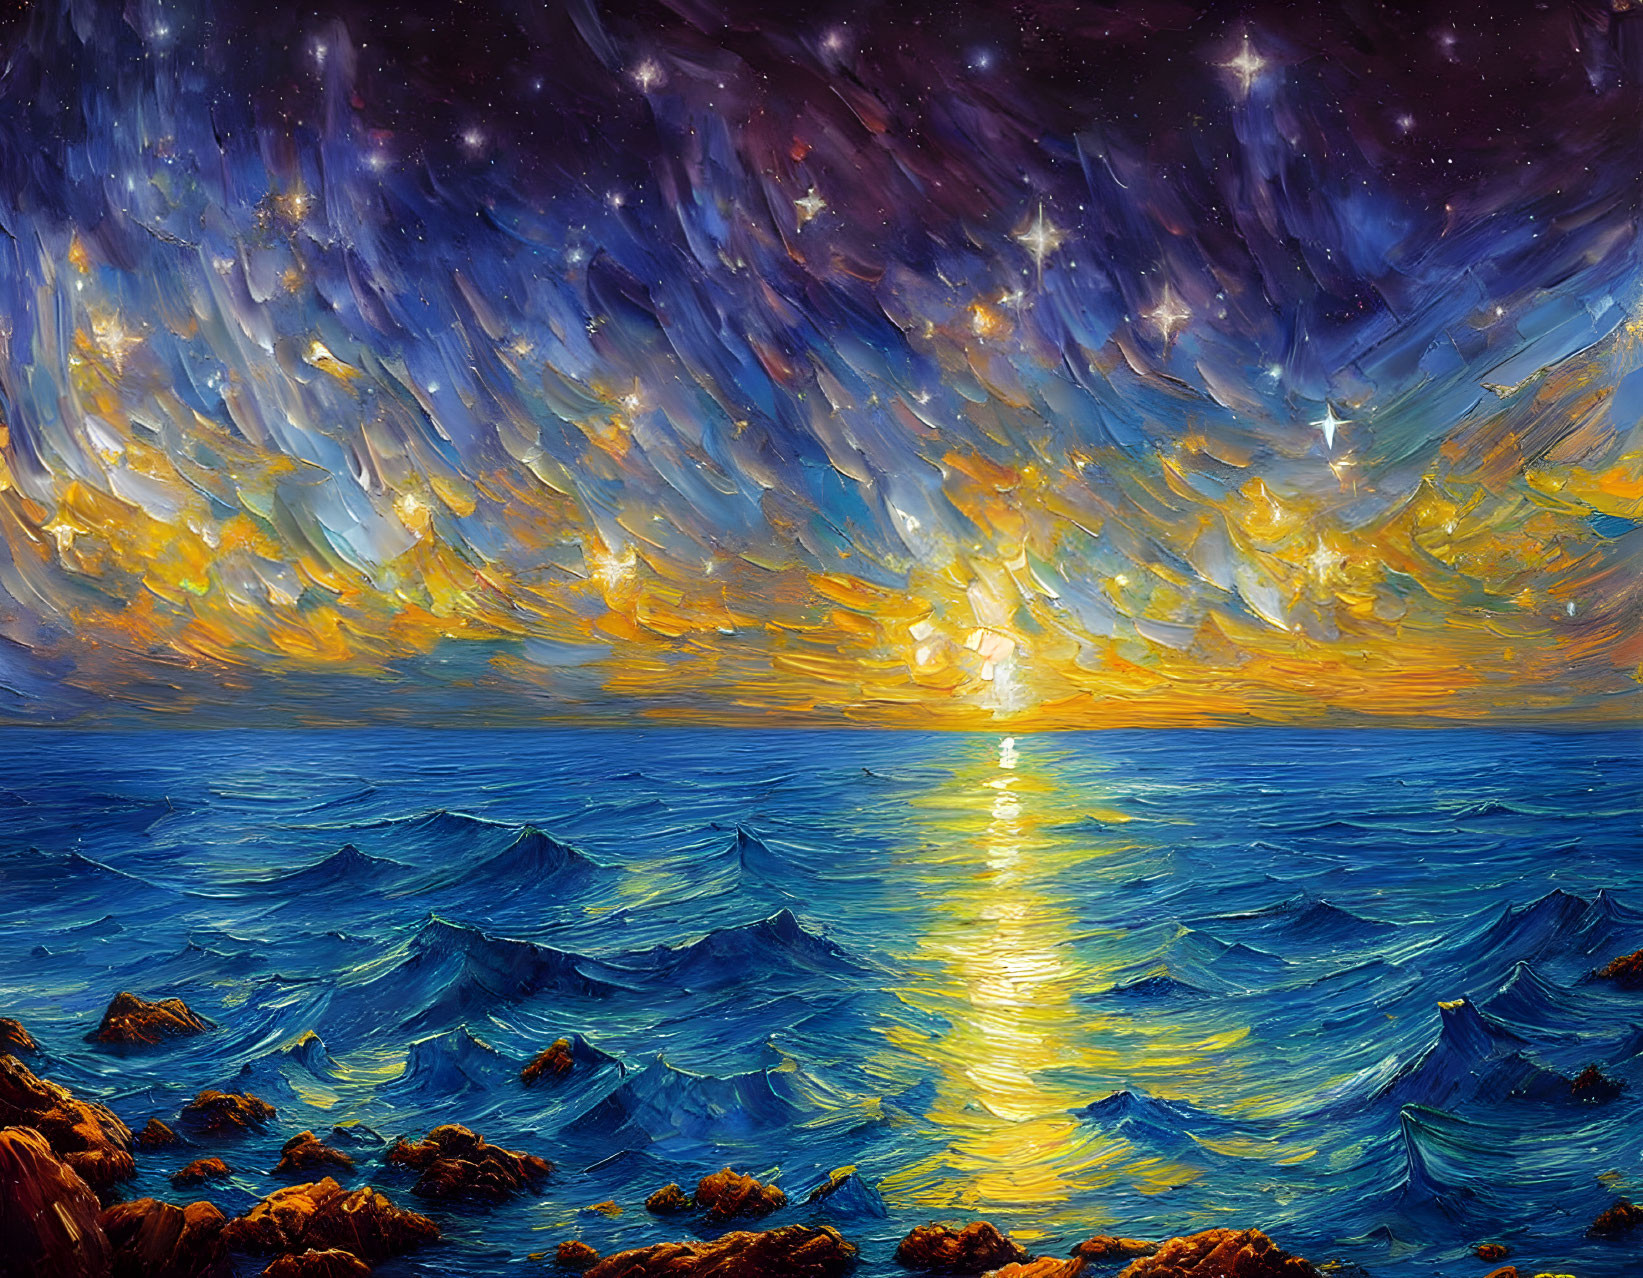 Colorful seascape oil painting with starry sky and sunbeam reflection